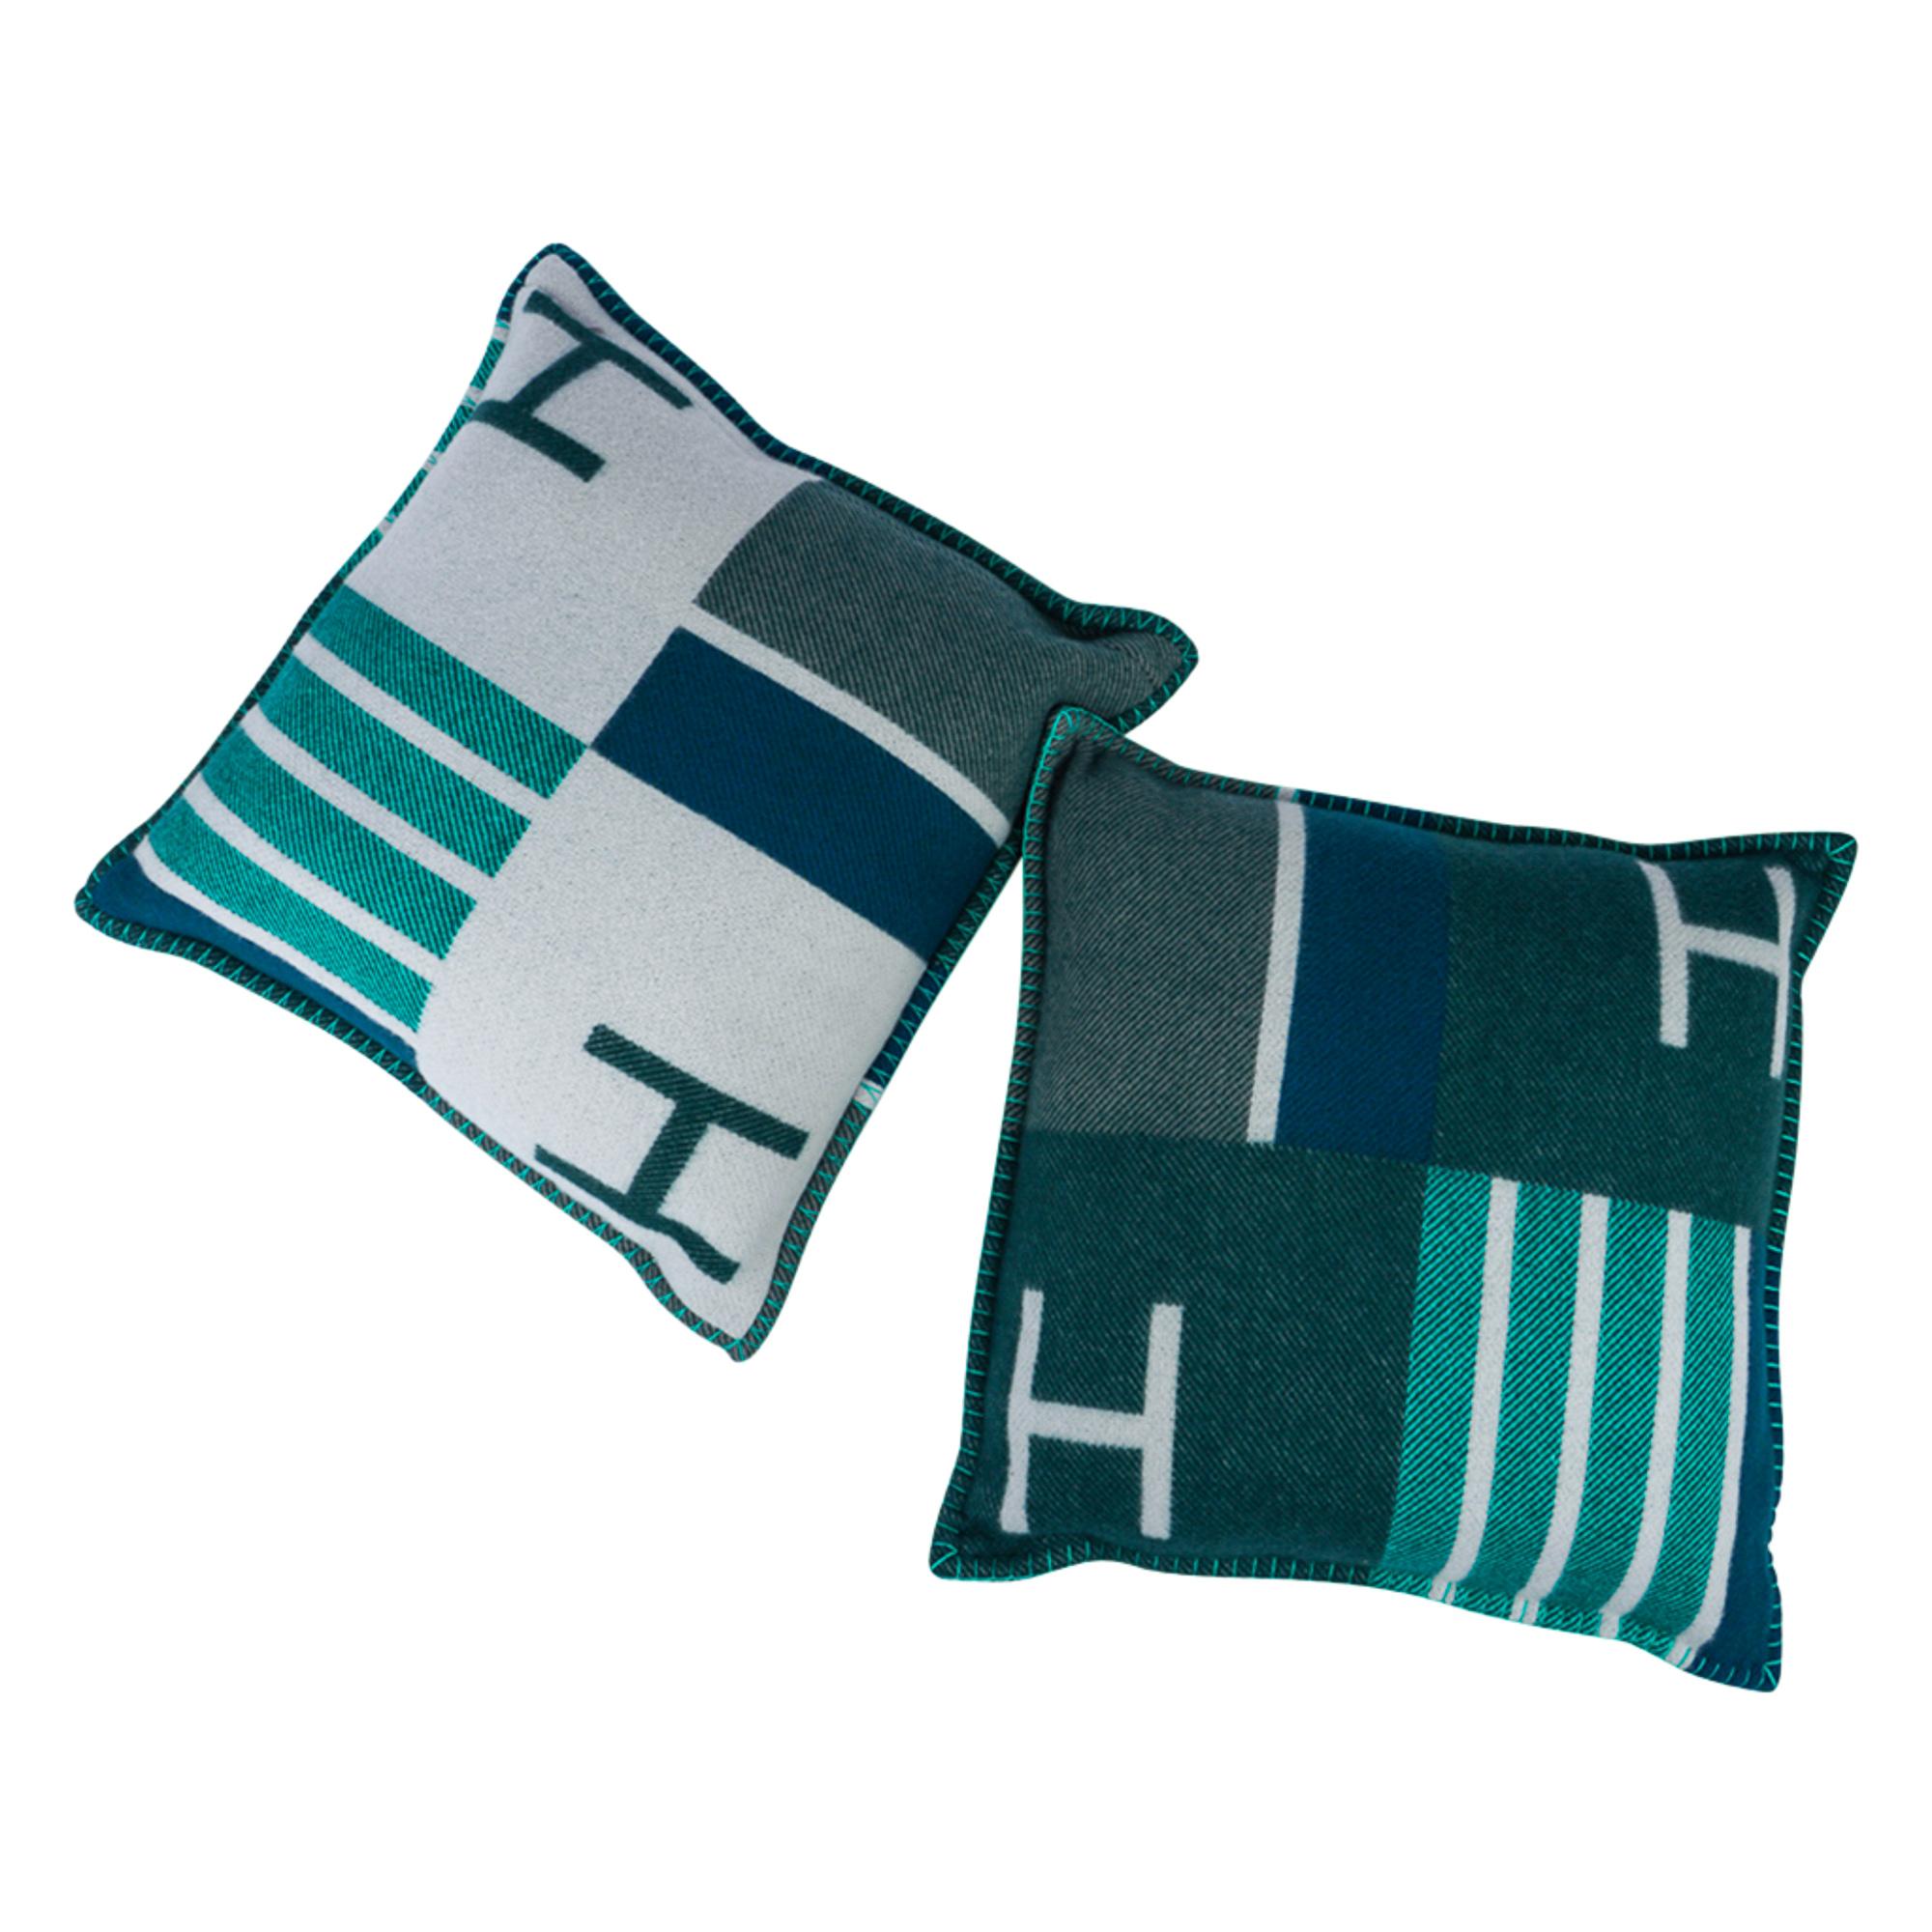 Guaranteed authentic Hermes small model Avalon Vibrato limited edition pillows with the iconic H in gorgeous tones of  Vert accentuated with blue.
Set of two. 
The removable cover is created from 90% Wool and 10% cashmere and has whip stitch